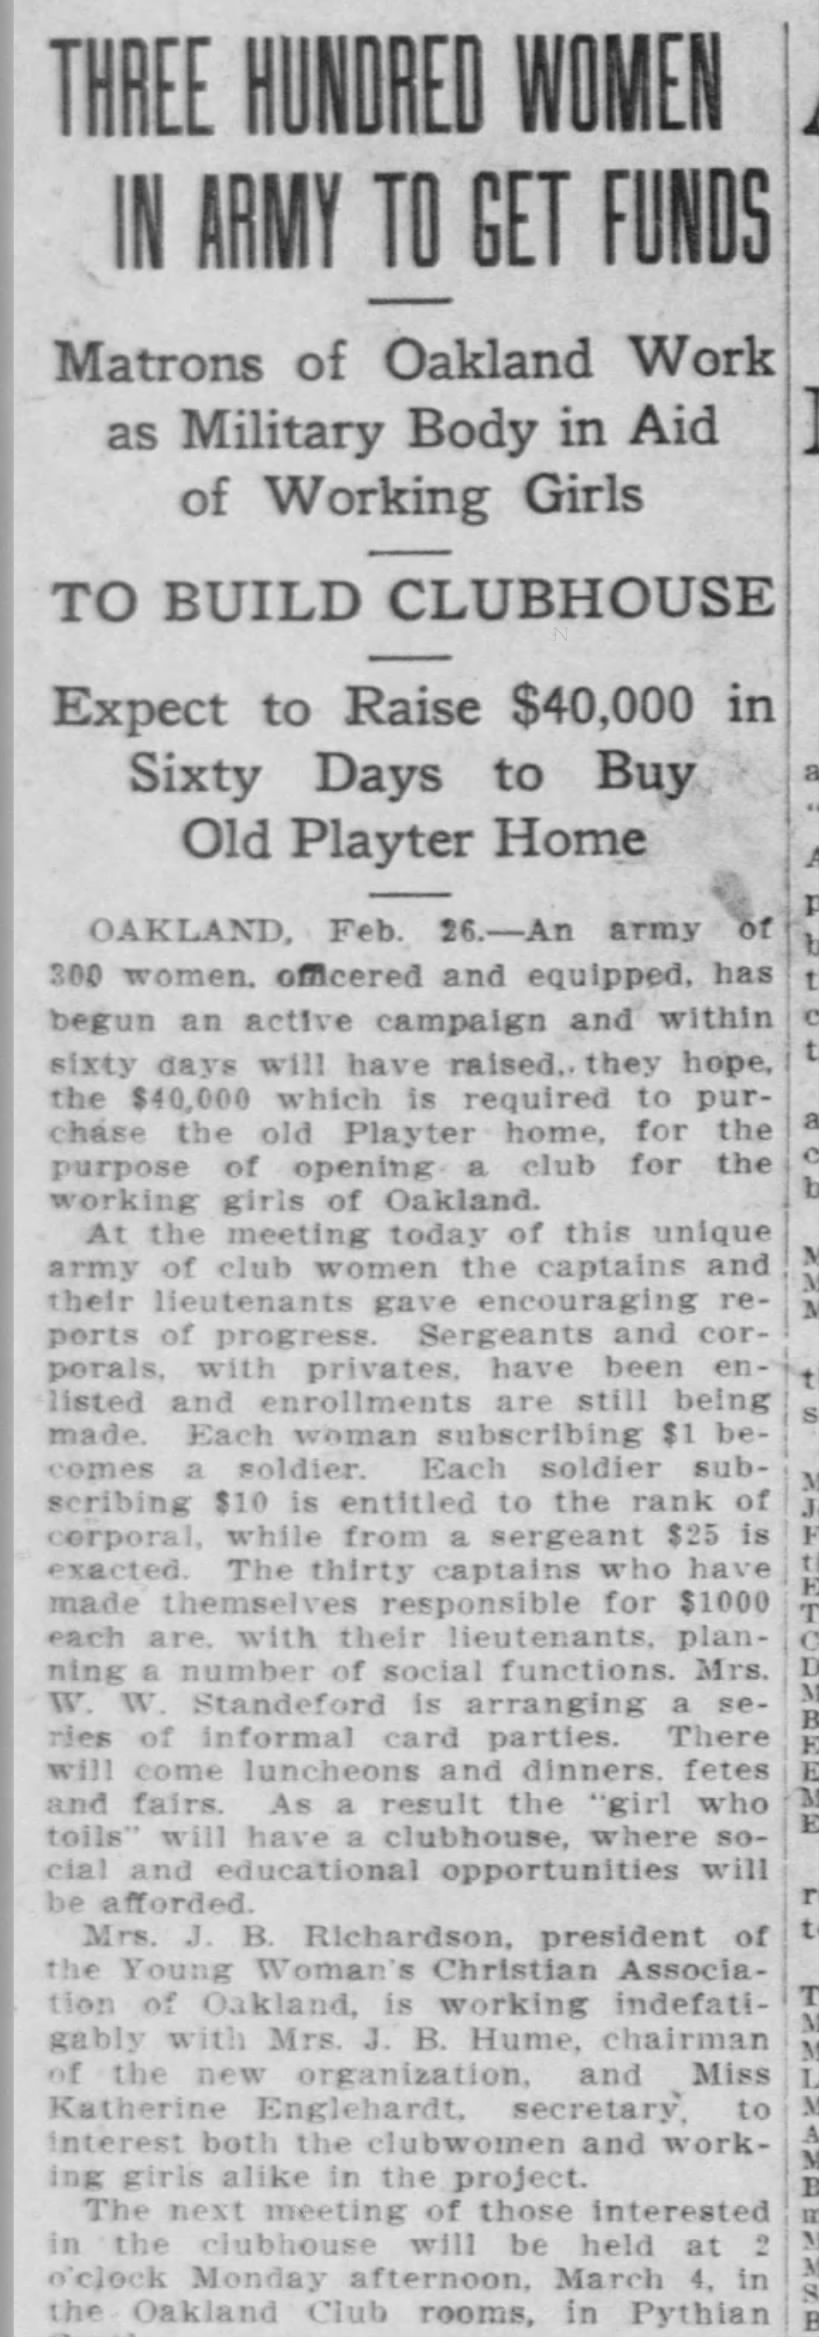 Expect to Raise $40,000 in Sixty Days to Buy Old Playter Home - SF Call February 27, 1907